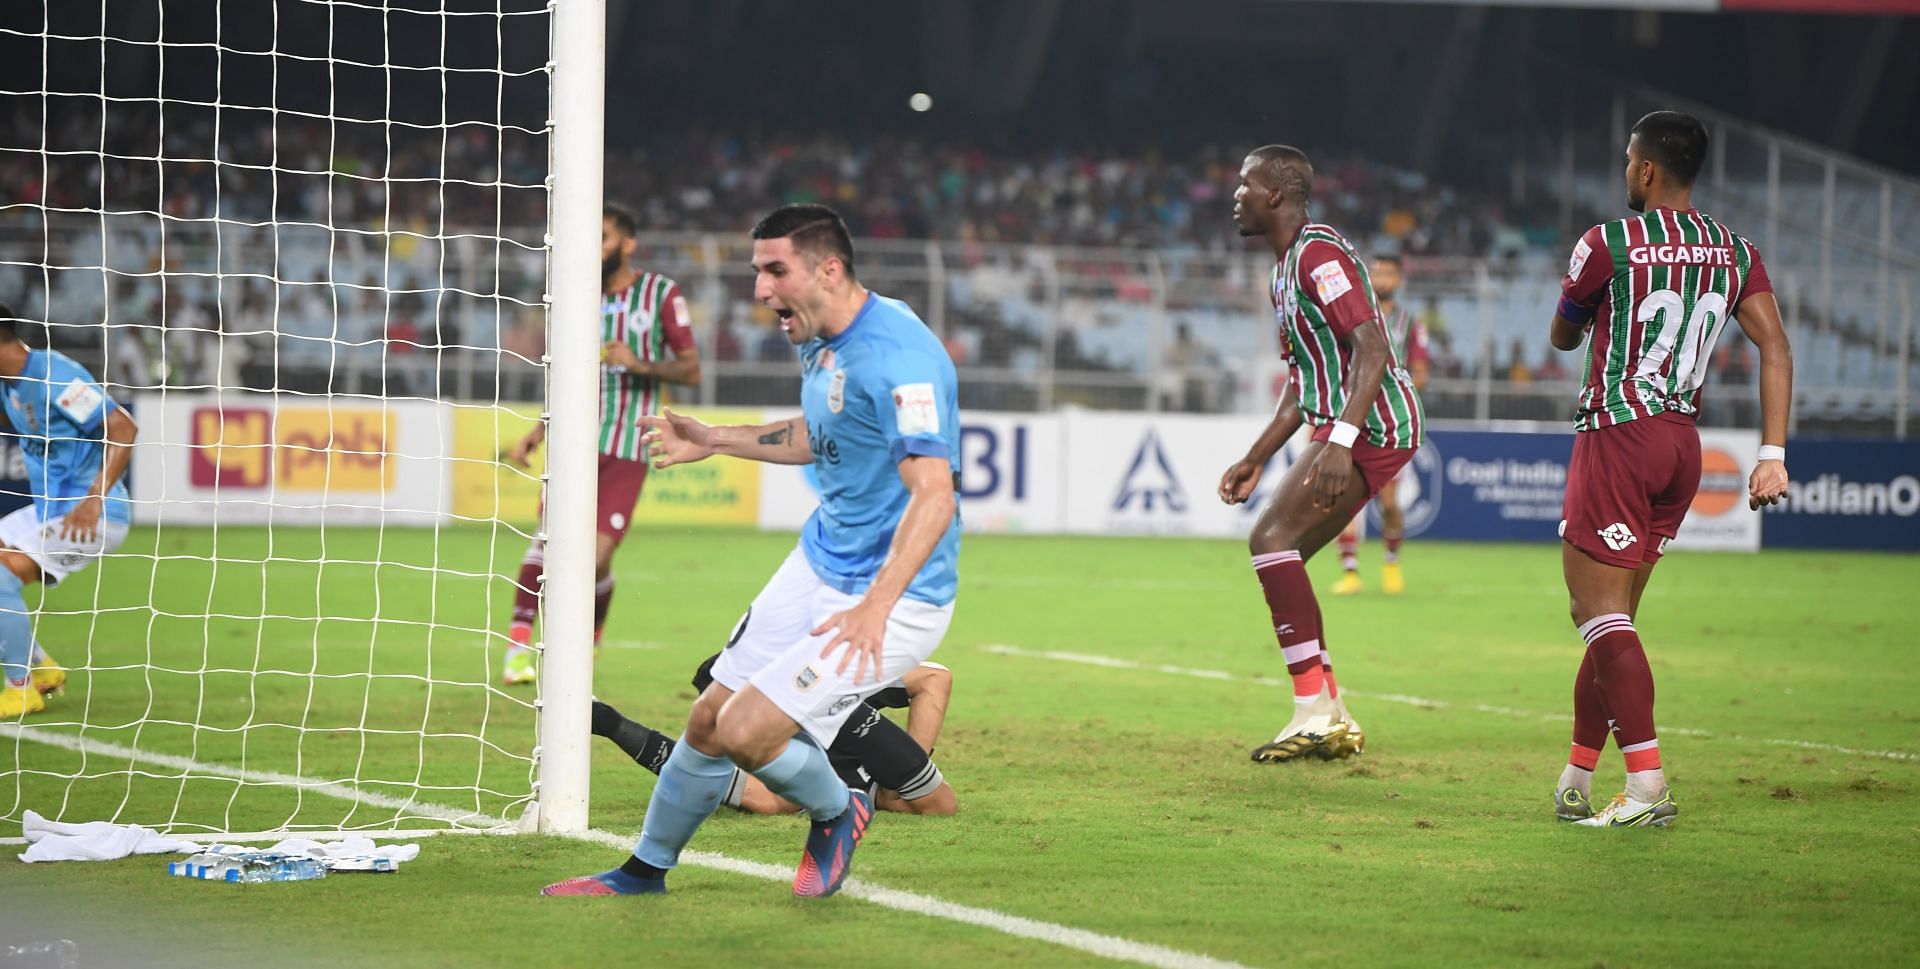 ATK Mohun Bagan and Mumbai City FC played out an engaging draw. [Credit: Suman Chattopadhyay/www.imagesolutionr.in]